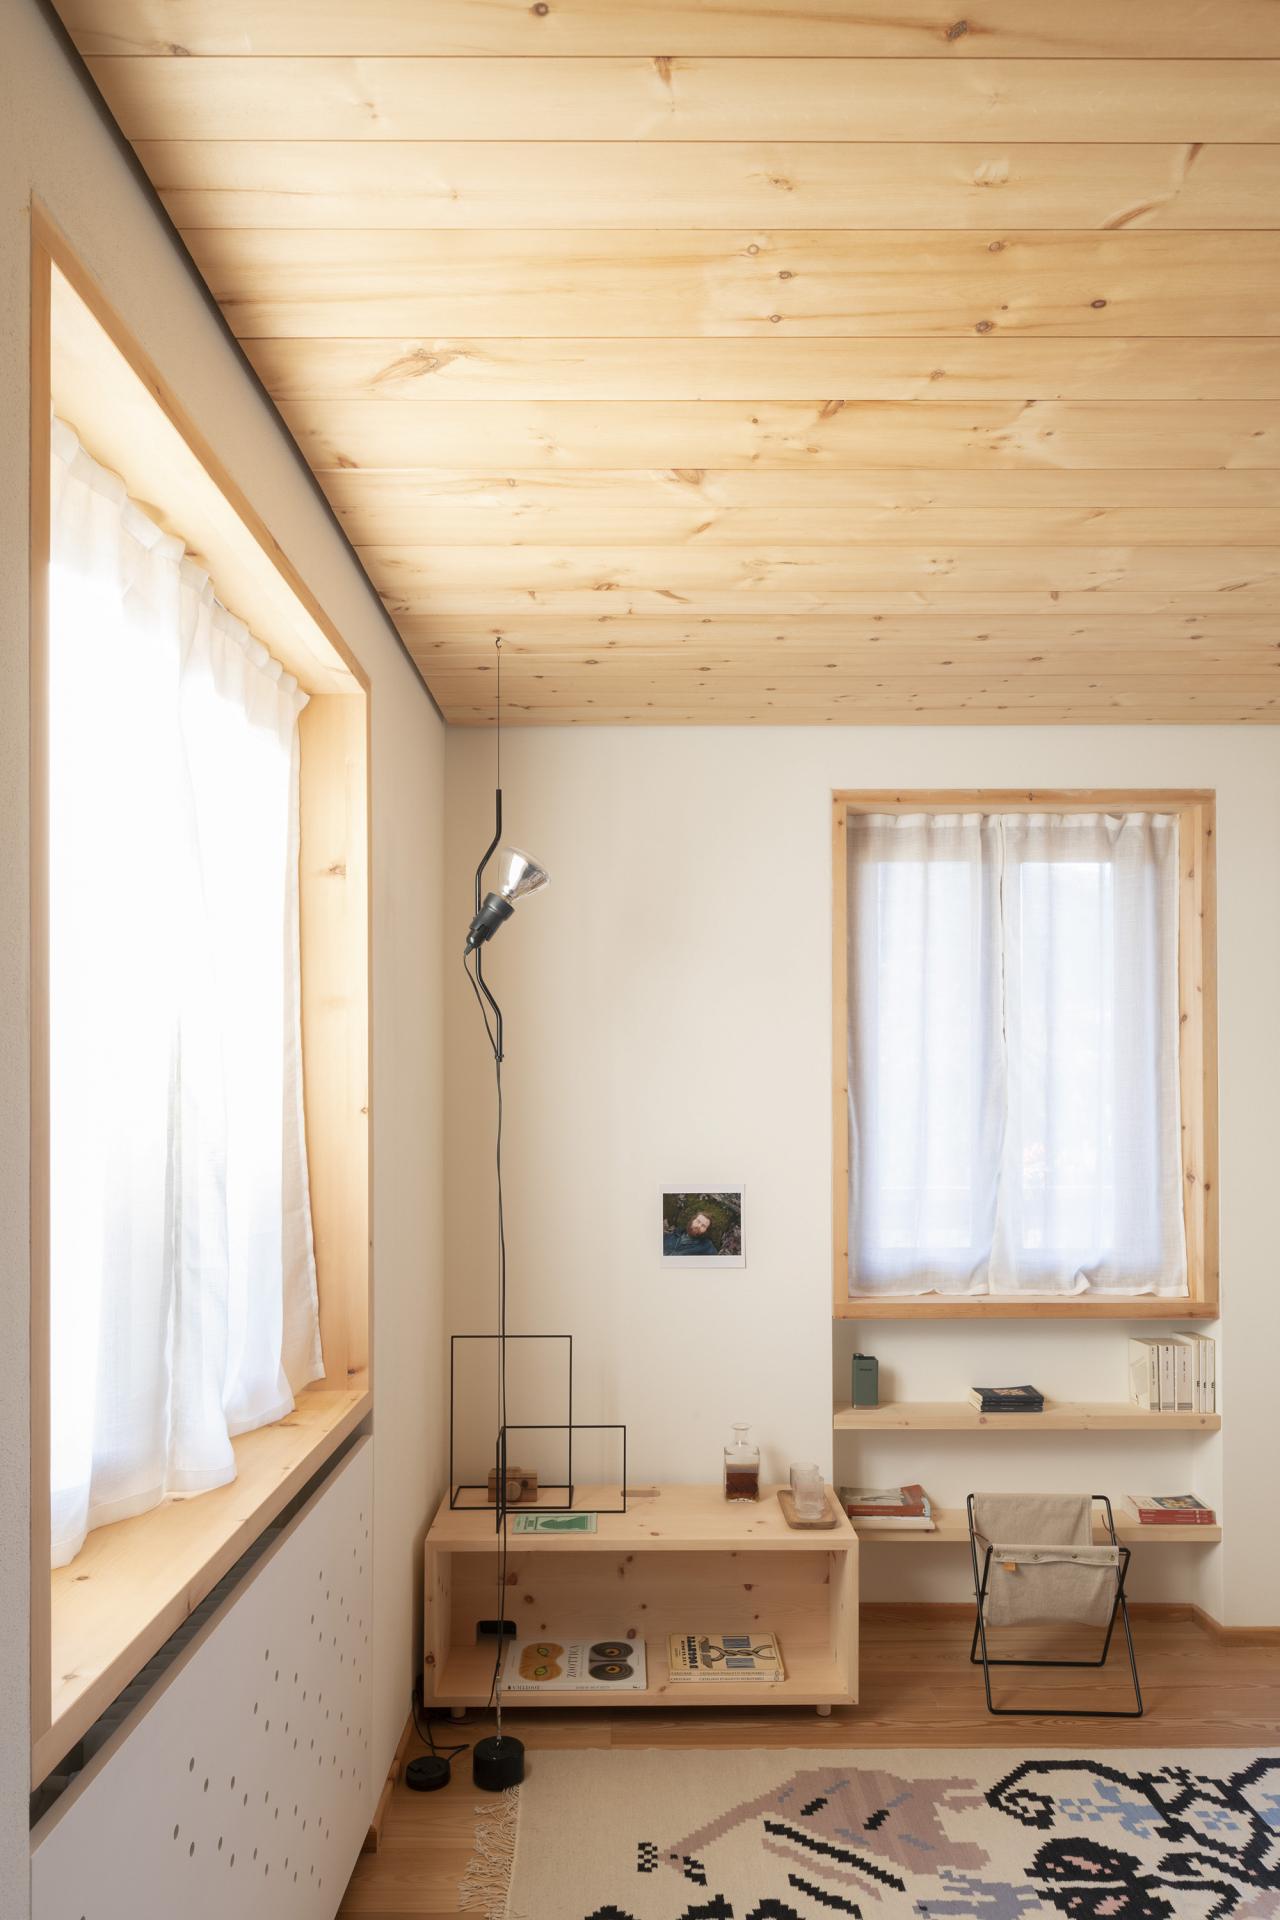  Inside a Peaceful Wooden Mountain Lodge in Italy